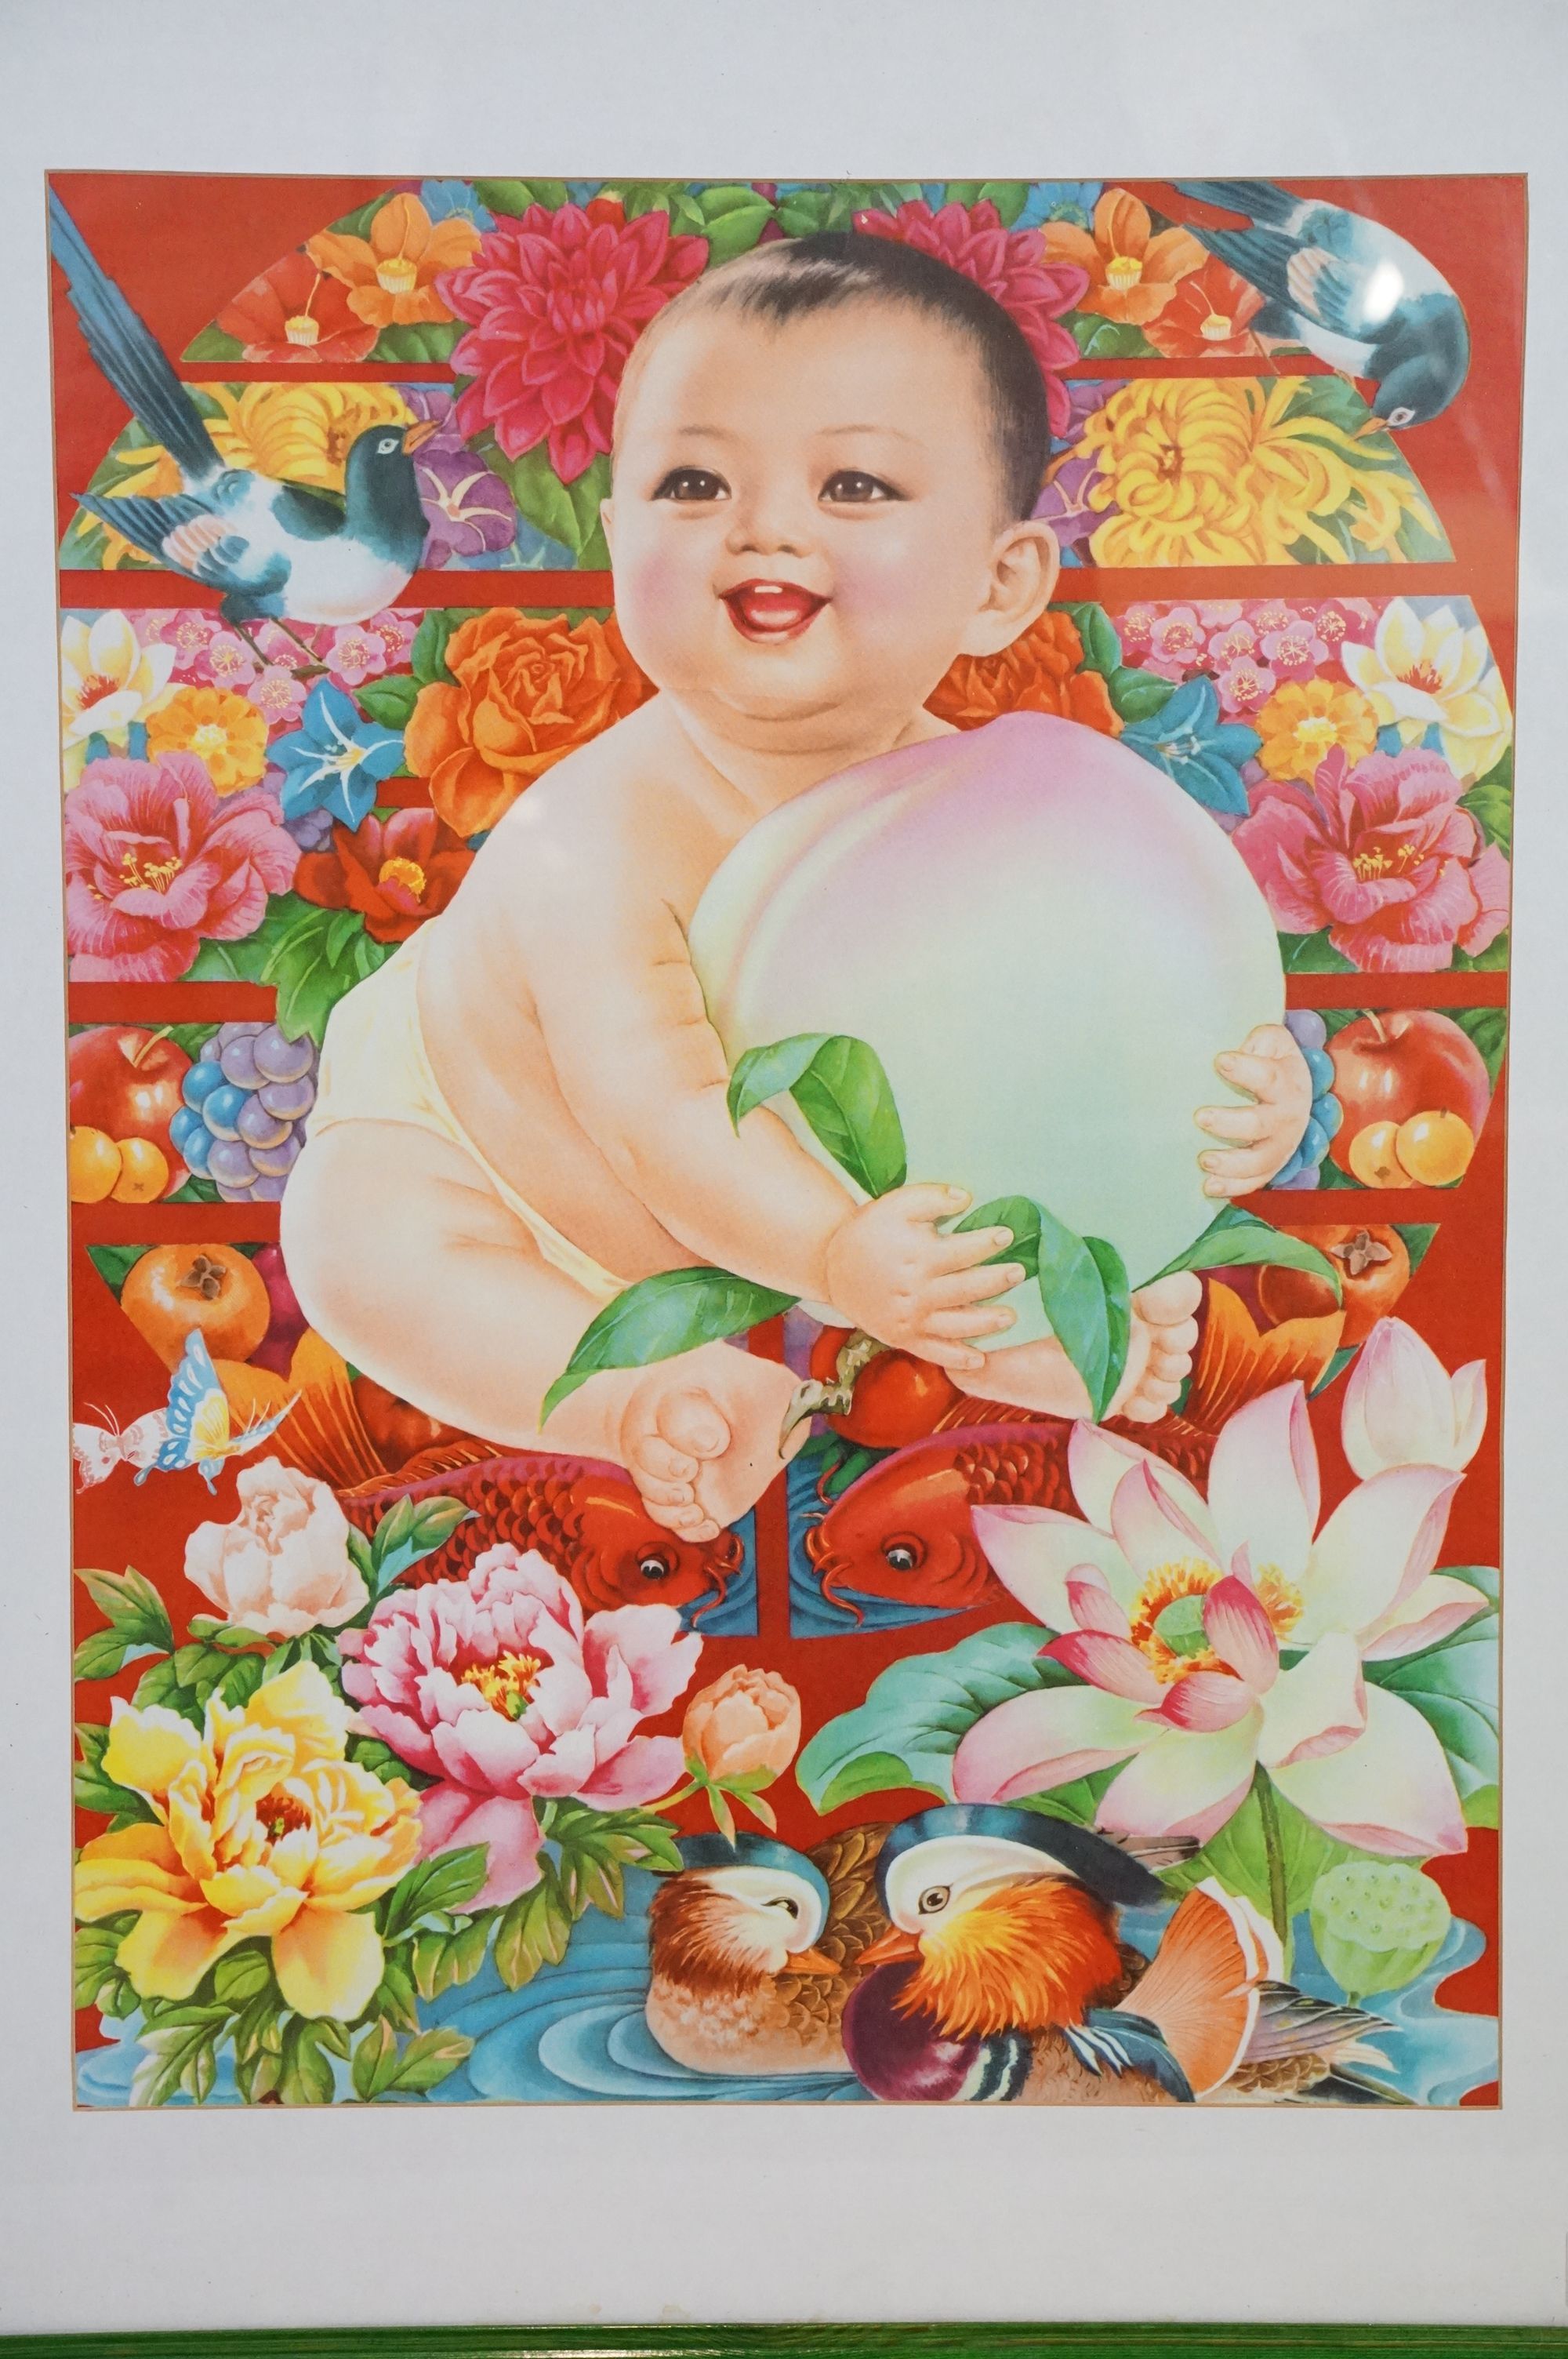 Huang Miaofa (Chinese), framed original vintage propaganda poster (a blessing descends upon the - Image 2 of 10